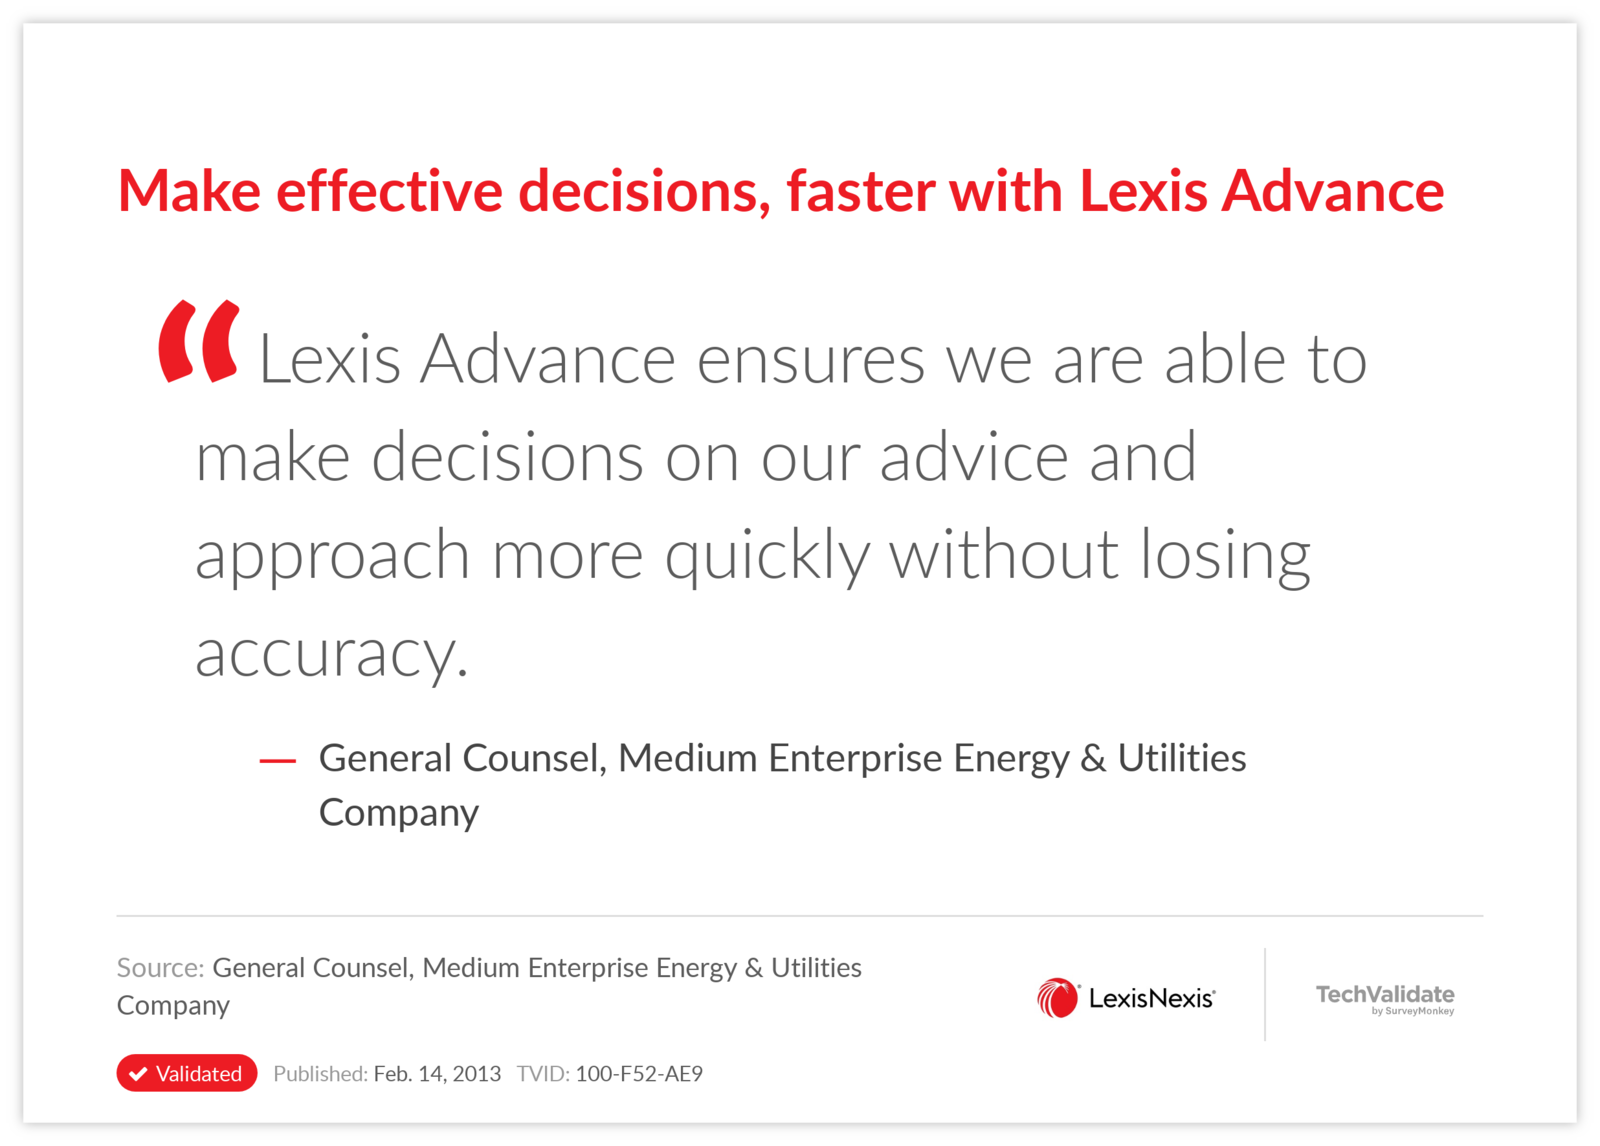 Make effective decisions, faster with Lexis Advance